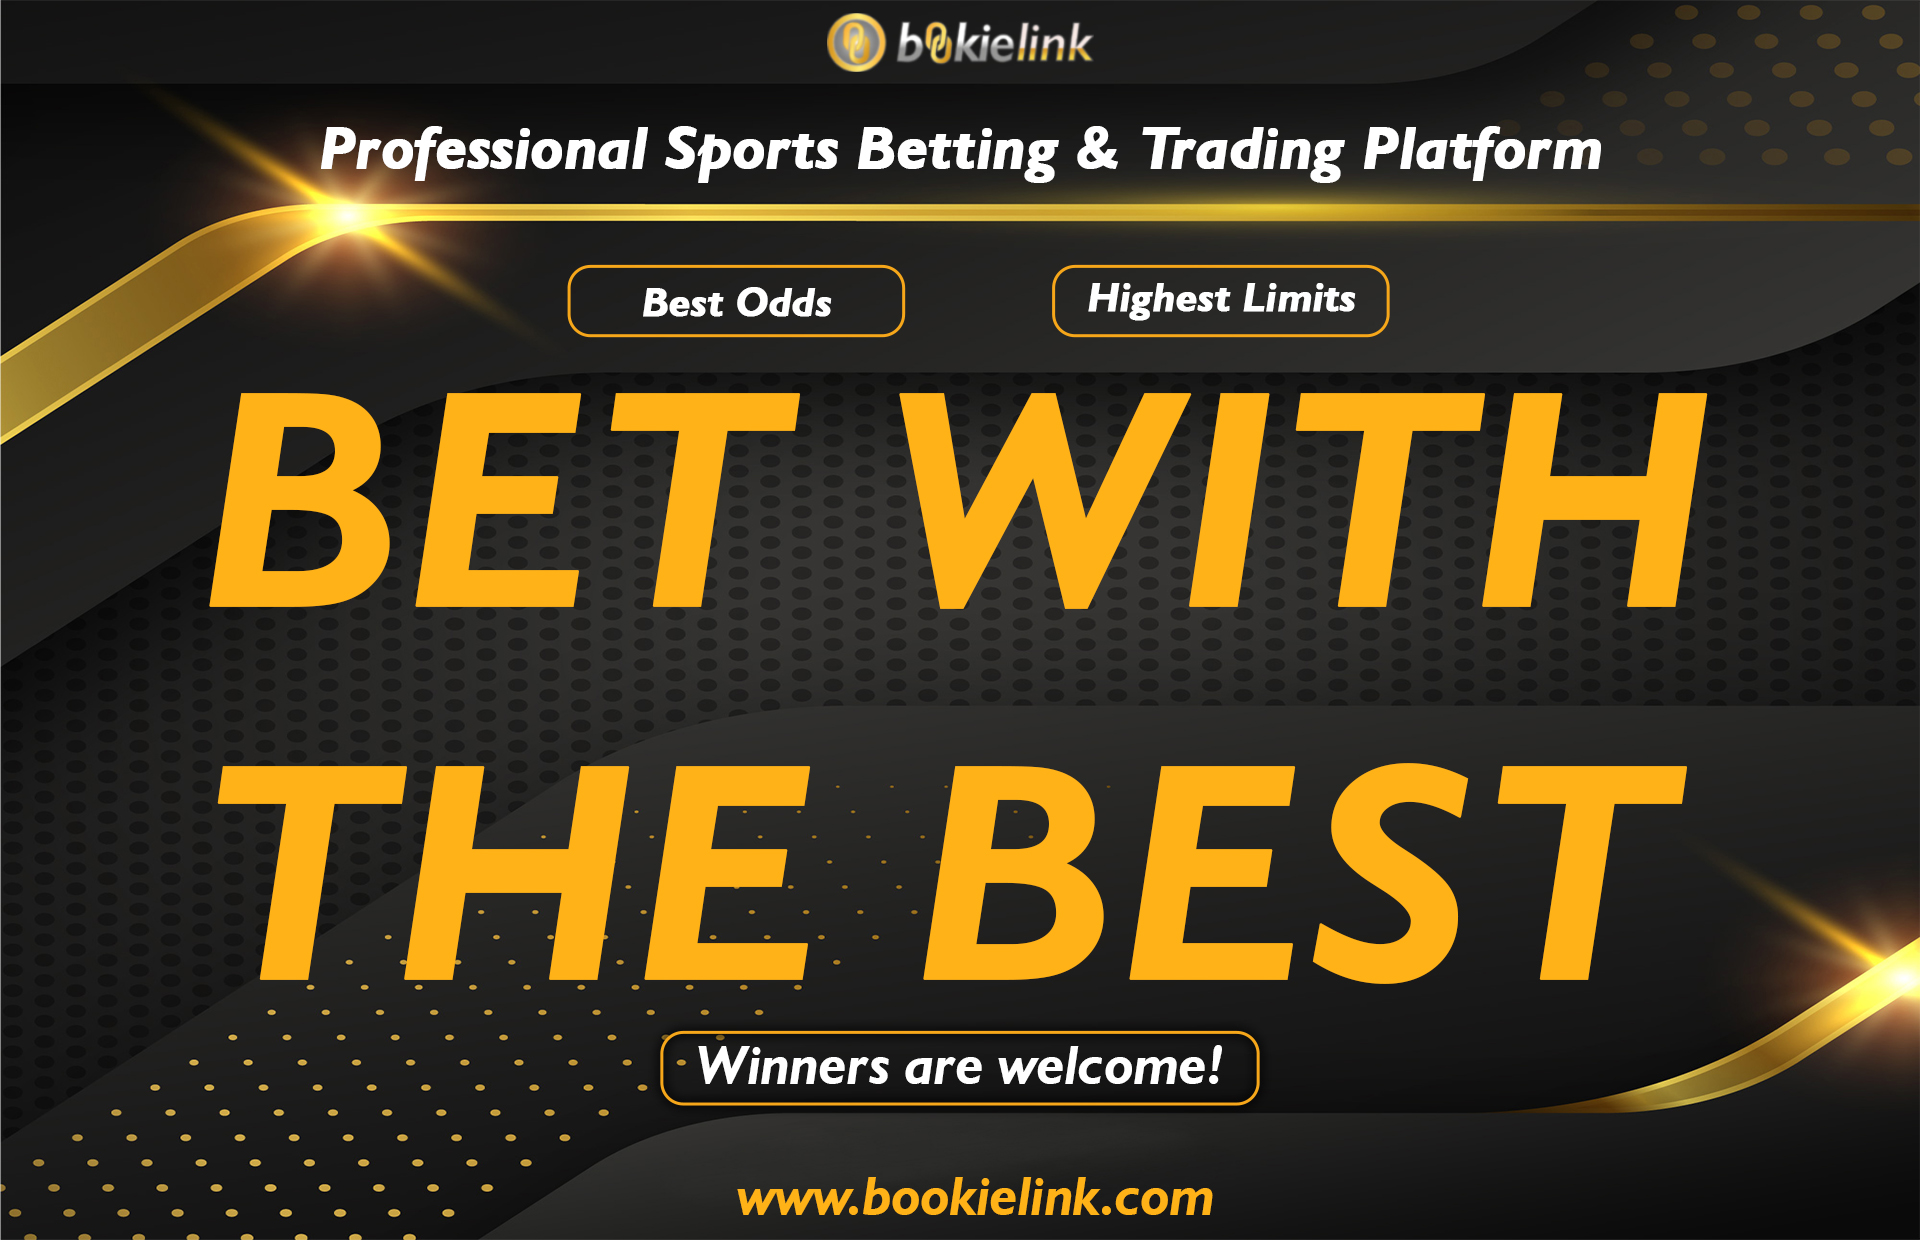 Everything You Wanted to Know About best online betting sites malaysia, best betting sites malaysia, online sports betting malaysia, betting sites malaysia, online betting in malaysia, malaysia online sports betting, online betting malaysia, sports betting malaysia, malaysia online betting, and Were Afraid To Ask